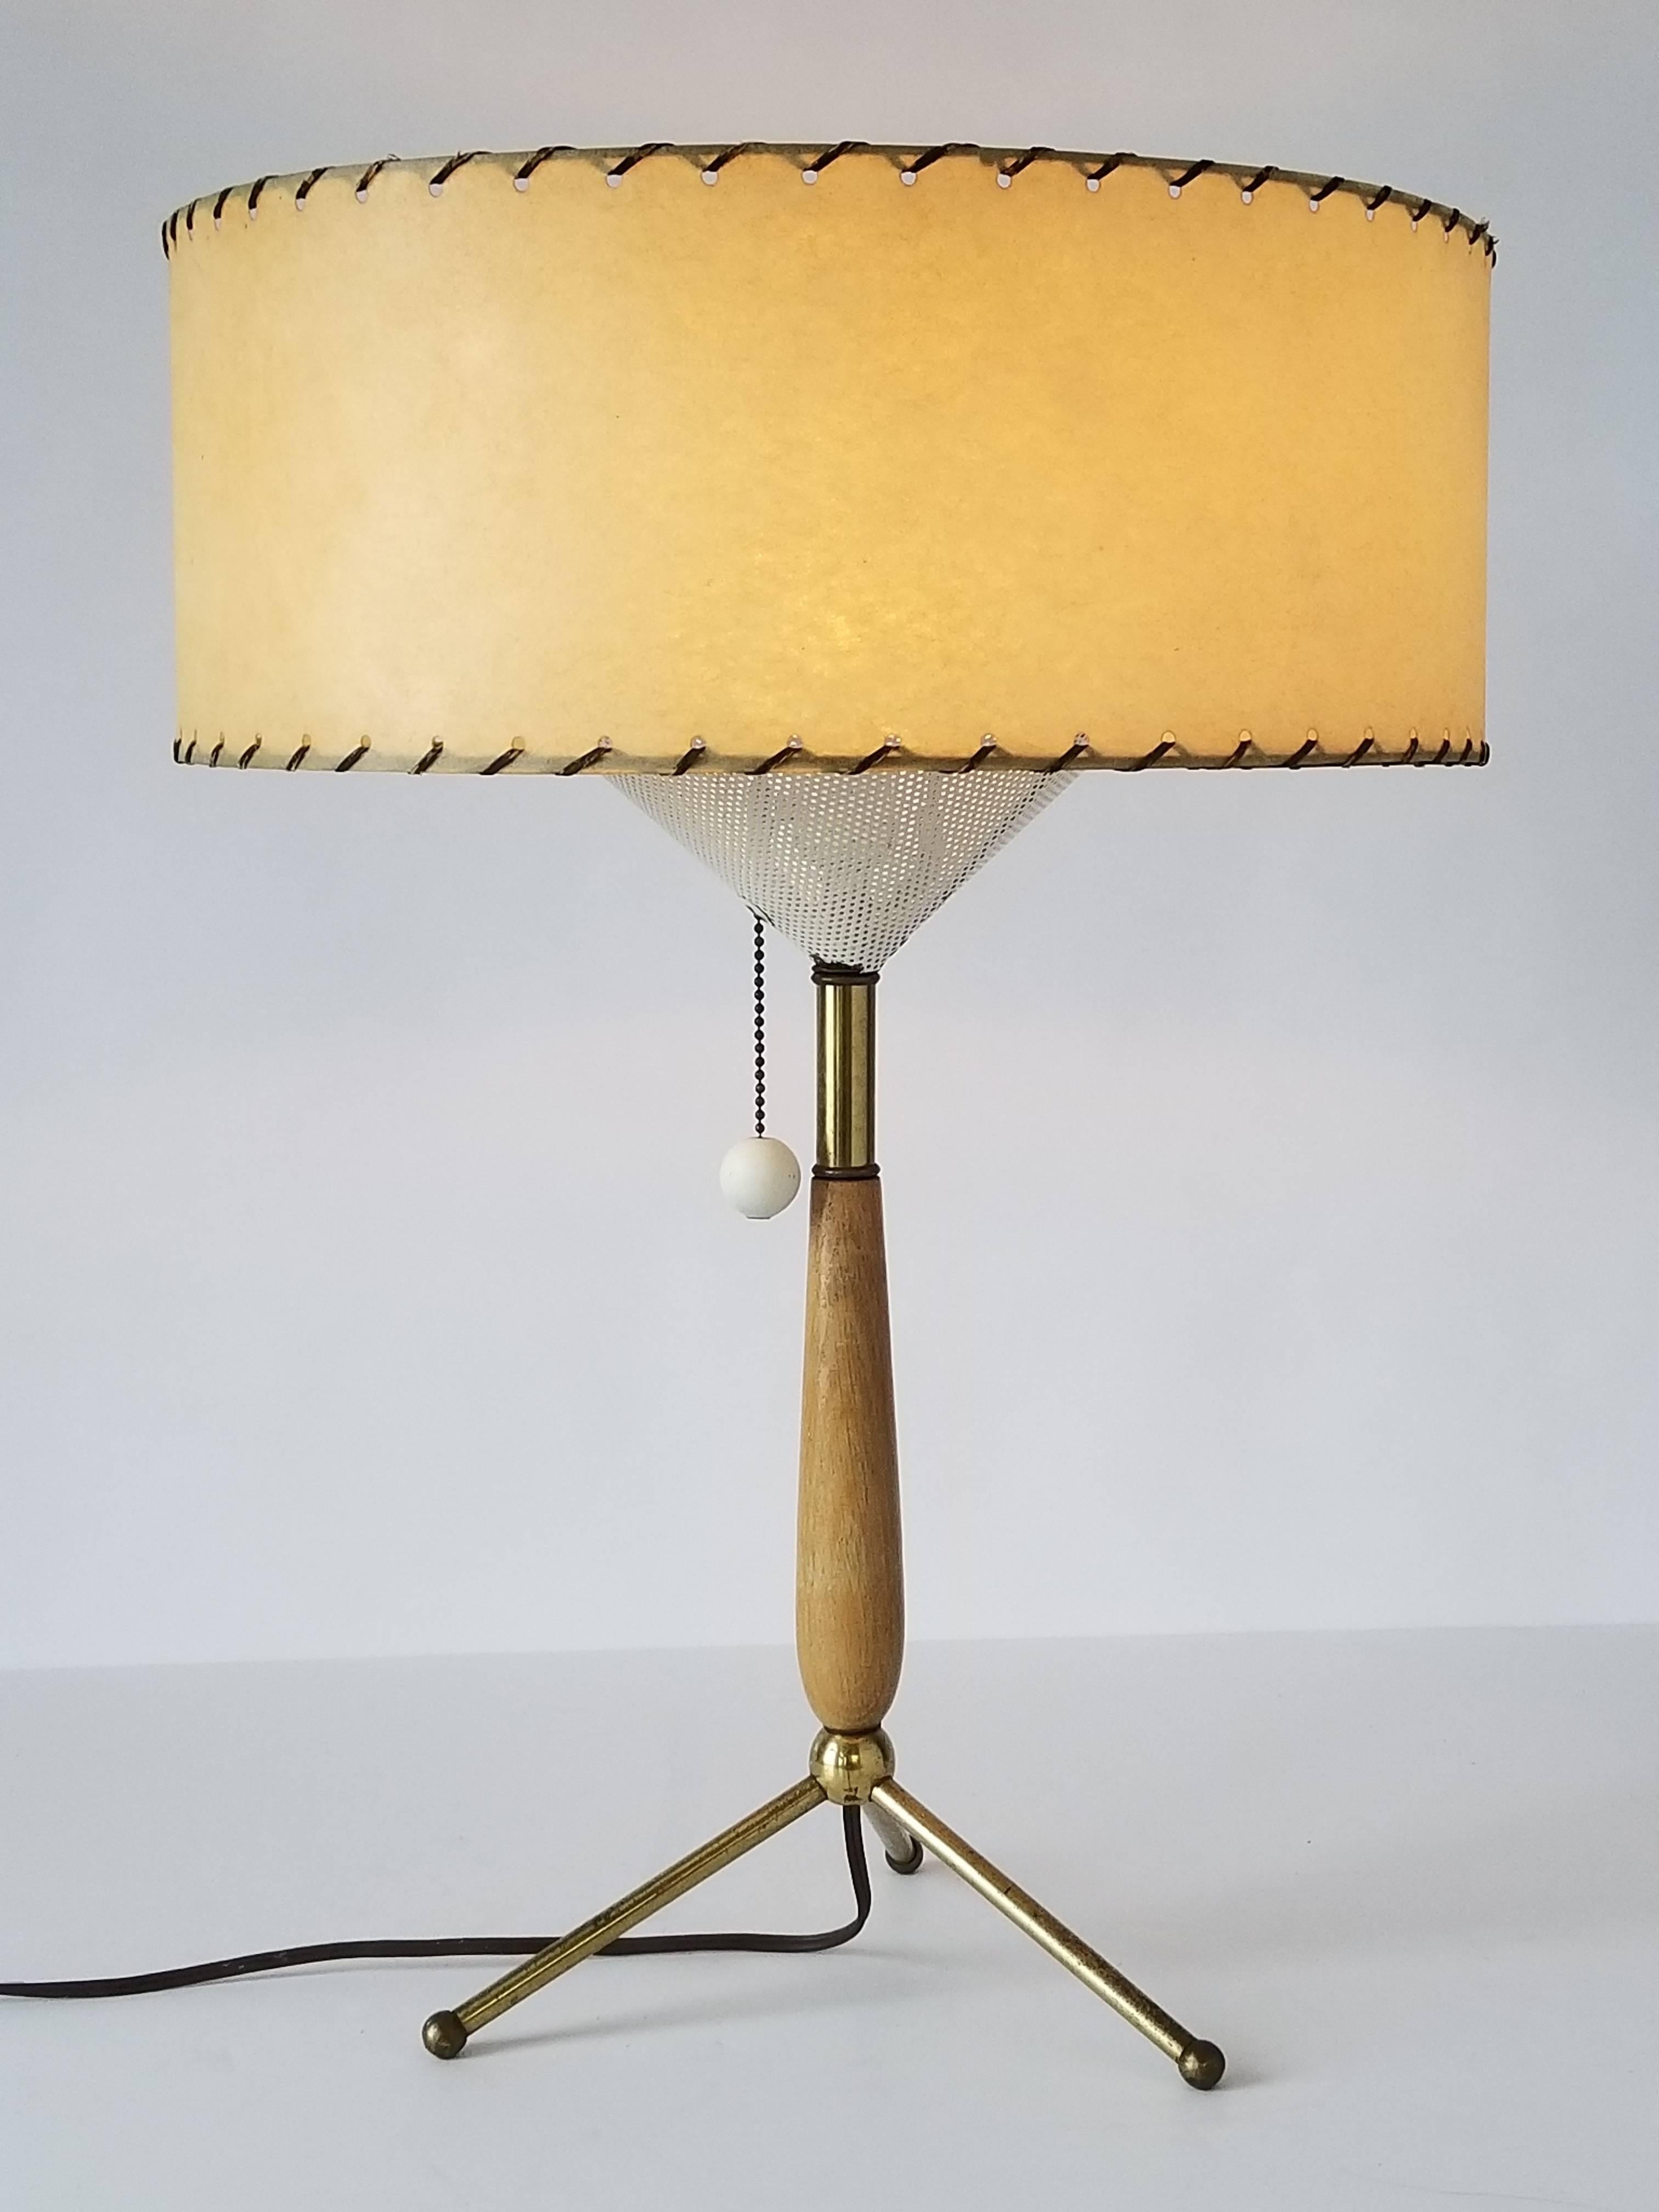 Brass, lacquered white birch, enameled pierced metal diffuser under and on top.

Fiberglass shade comes with order.

Contain one regular E26 size light bulb rated at 60 watt.

On/off pull chain .